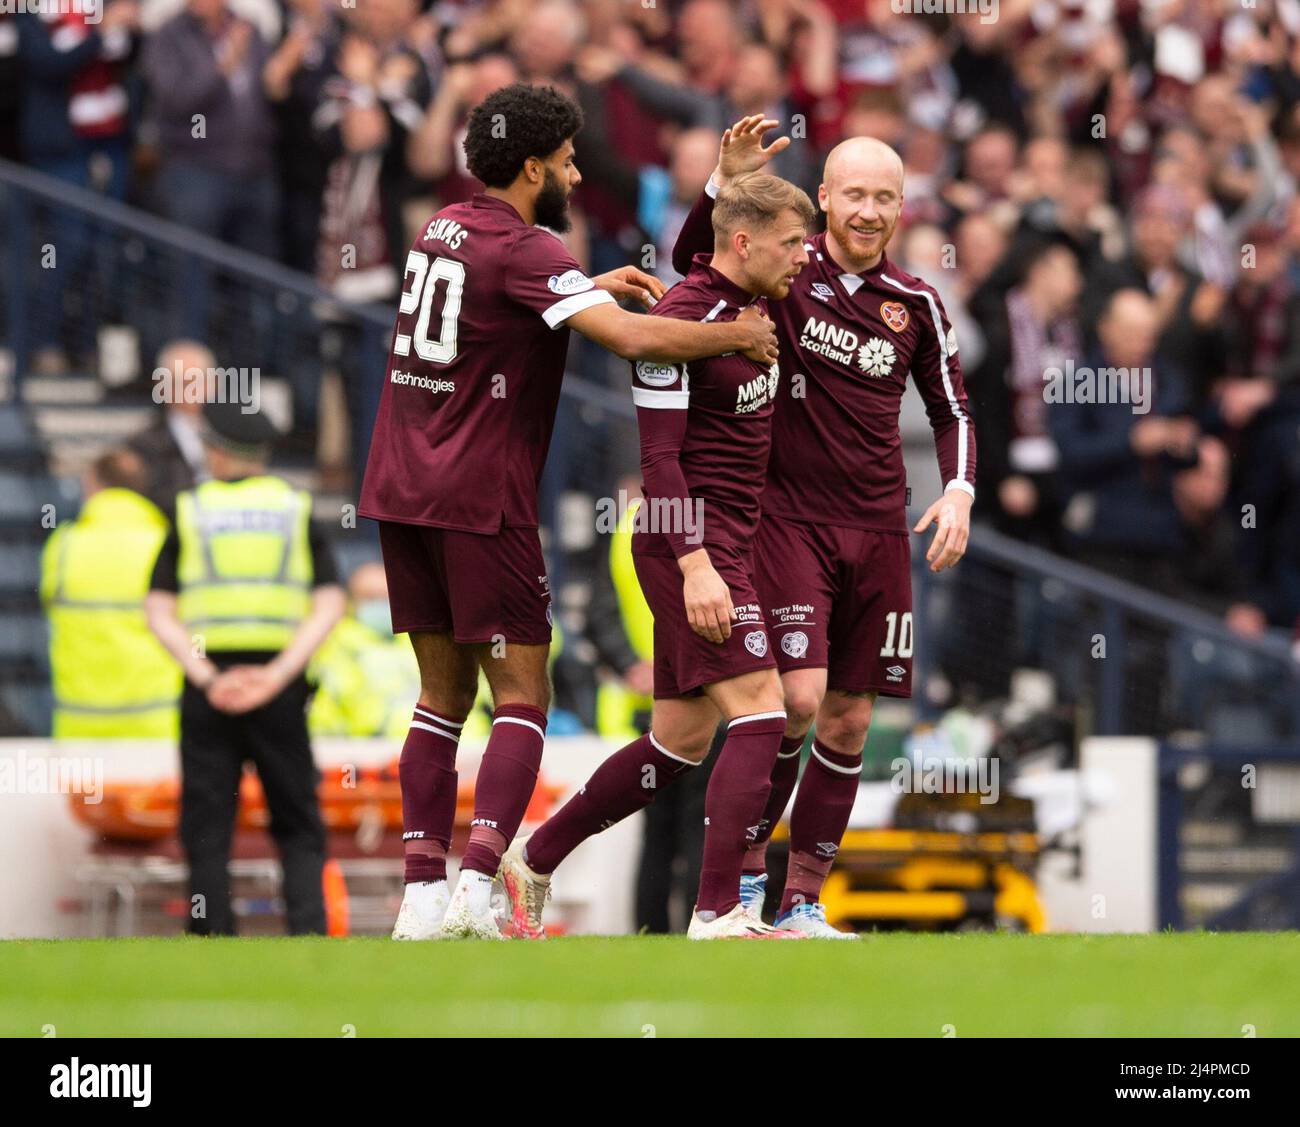 Glasgow, UK. 07th Apr, 2022. Scottish Cup semi final - Heart of Midlothian FC v Hibernian FC 07/04/2022 Pic shows: Hearts' left-back Stephen Kingsley is congratulated by teammates, Ellis Simms and Liam Boyce, after putting his side 2-0 in front in the 21st minute as Hearts take on Hibs in the Scottish Cup semi final at Hampden Park, Glasgow Credit: Ian Jacobs/Alamy Live News Stock Photo